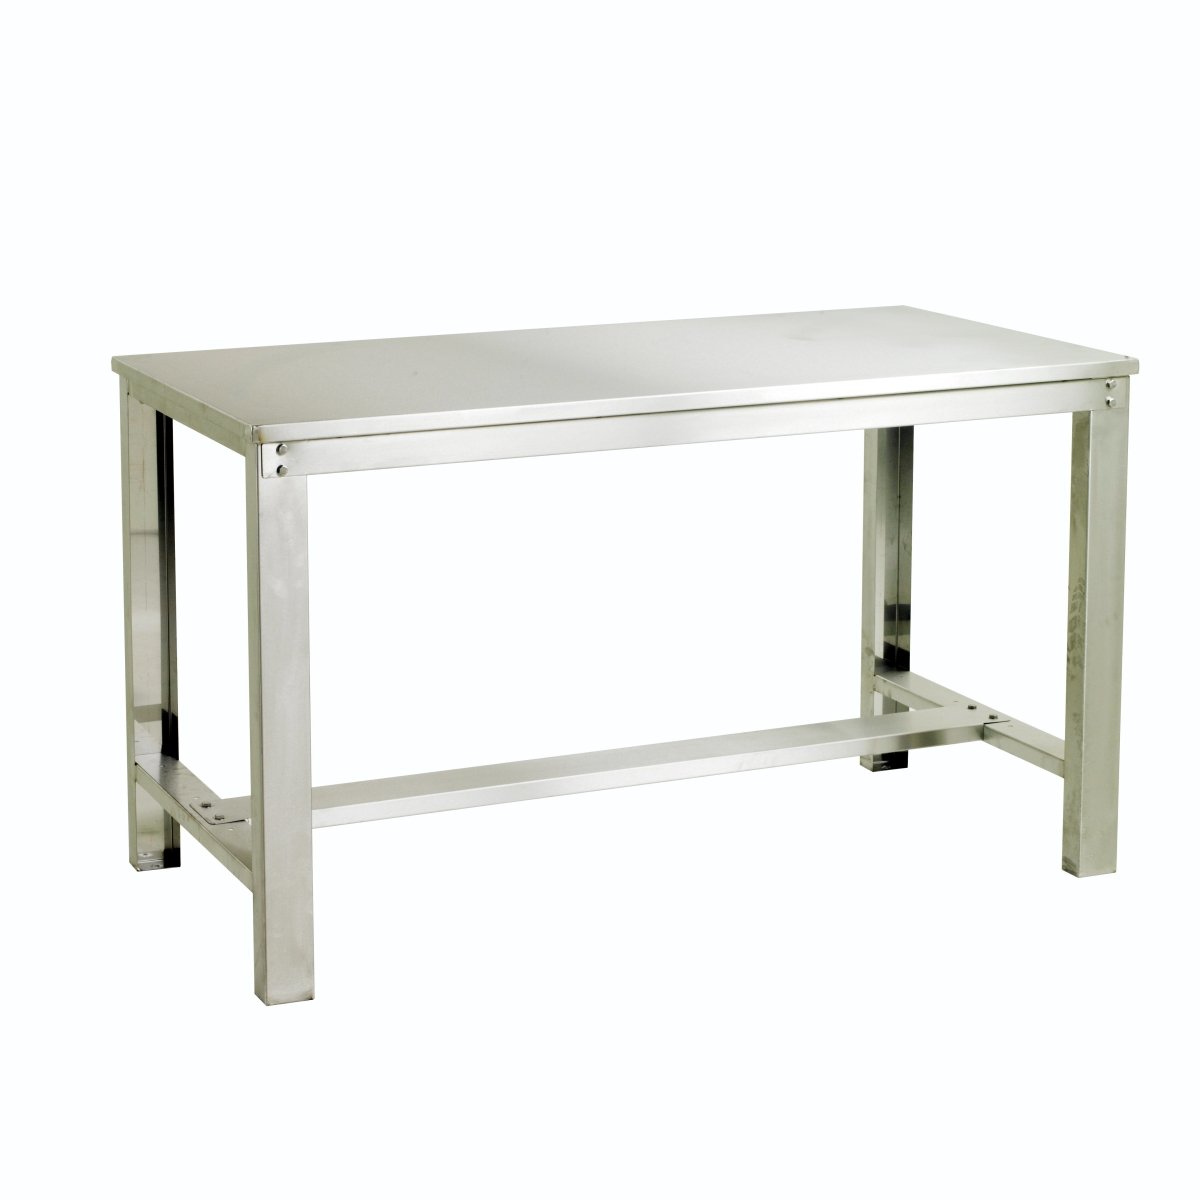 Stainless Steel Heavy Duty Workbench 450Kg Capacity - Warehouse Storage Products